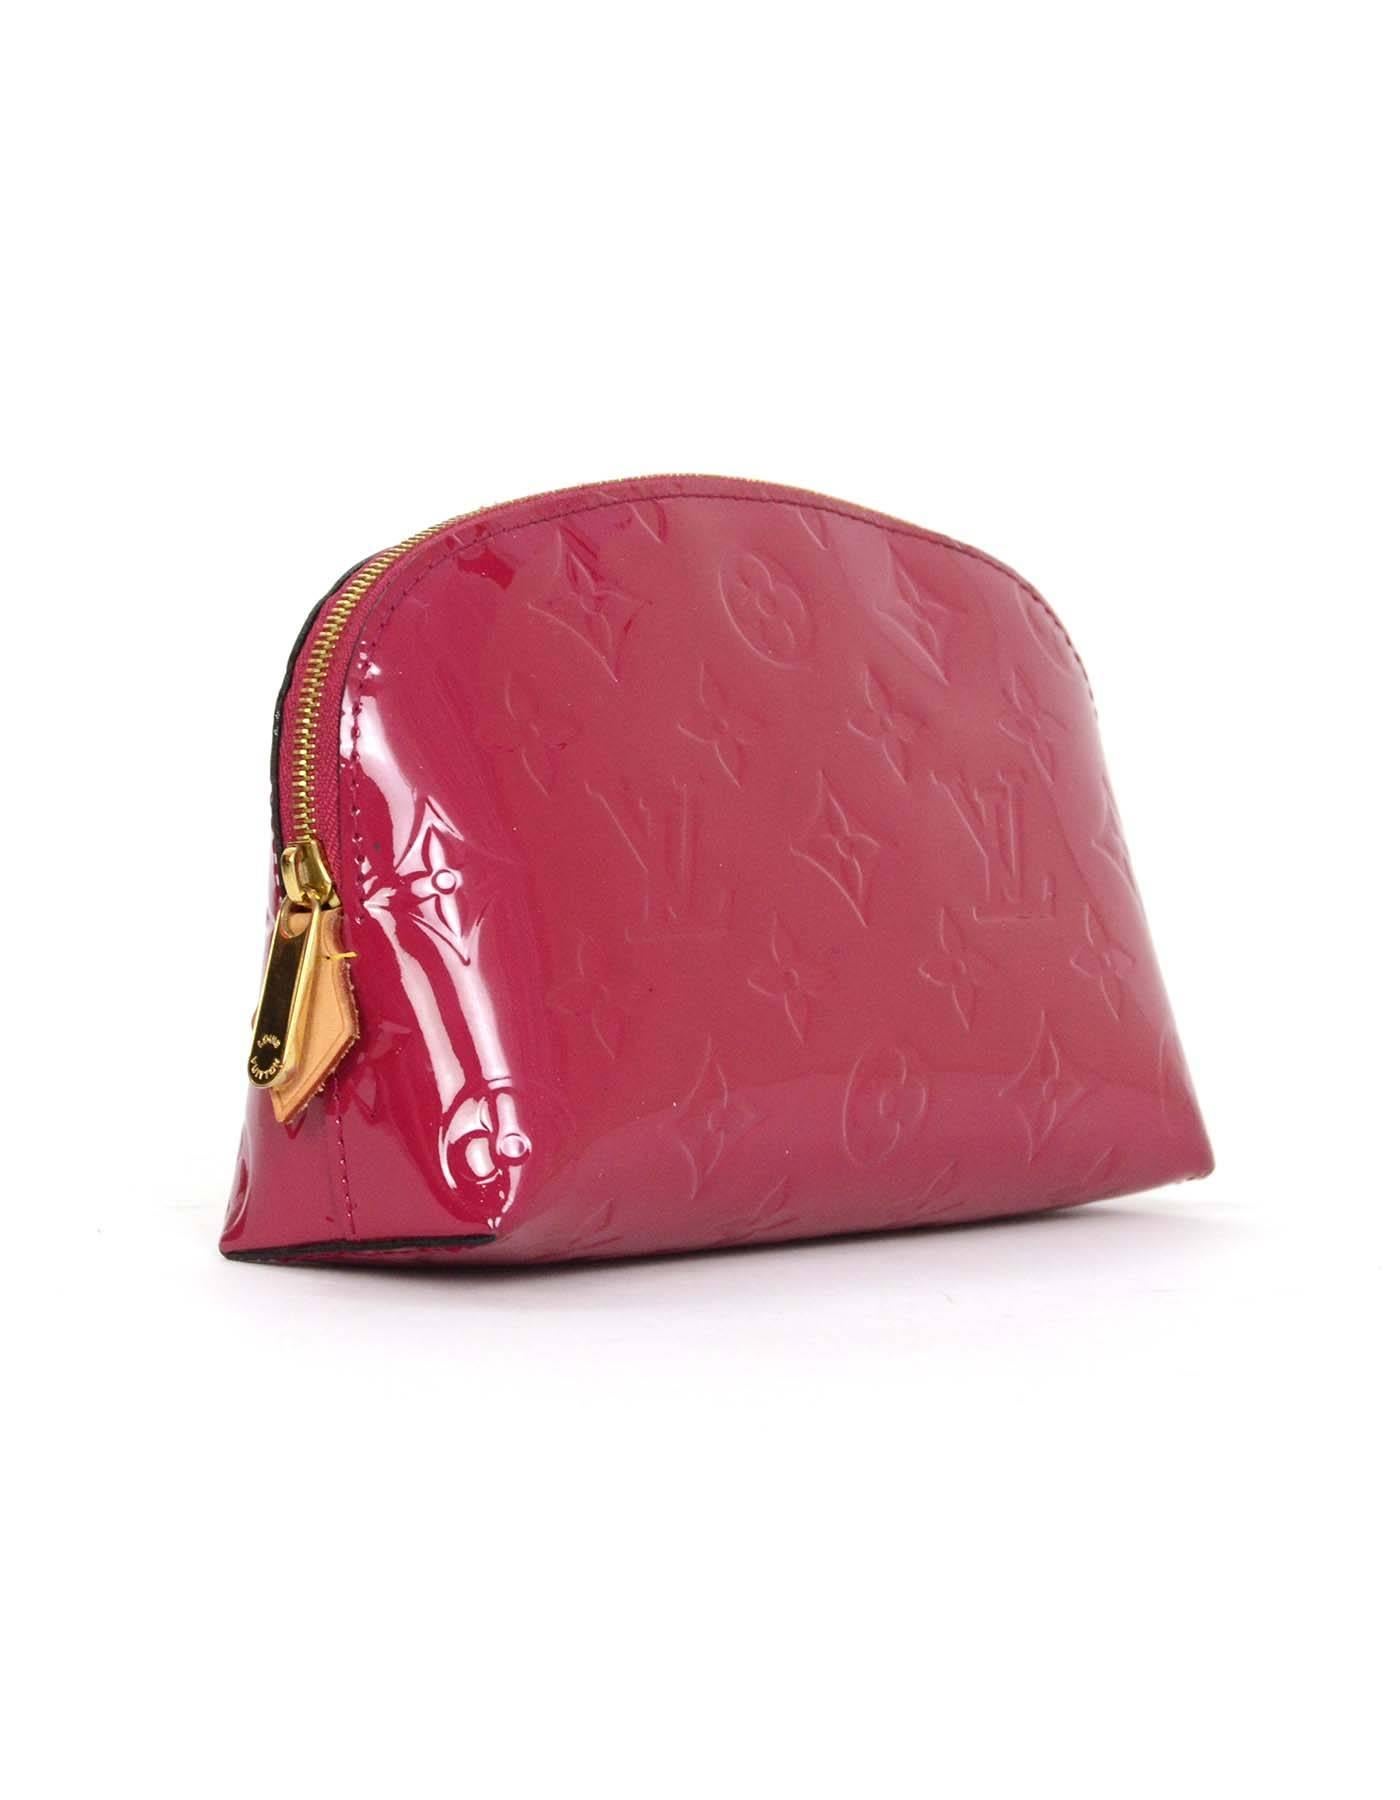 Louis Vuitton Magenta Vernis Cosmetic Pouch
Made in: France
Year of Production: 2015
Color: Magenta
Hardware: Goldtone
Materials: Vernis leather (patent leather)
Lining: Magenta textile
Closure/opening: Zip across top
Exterior Pockets: